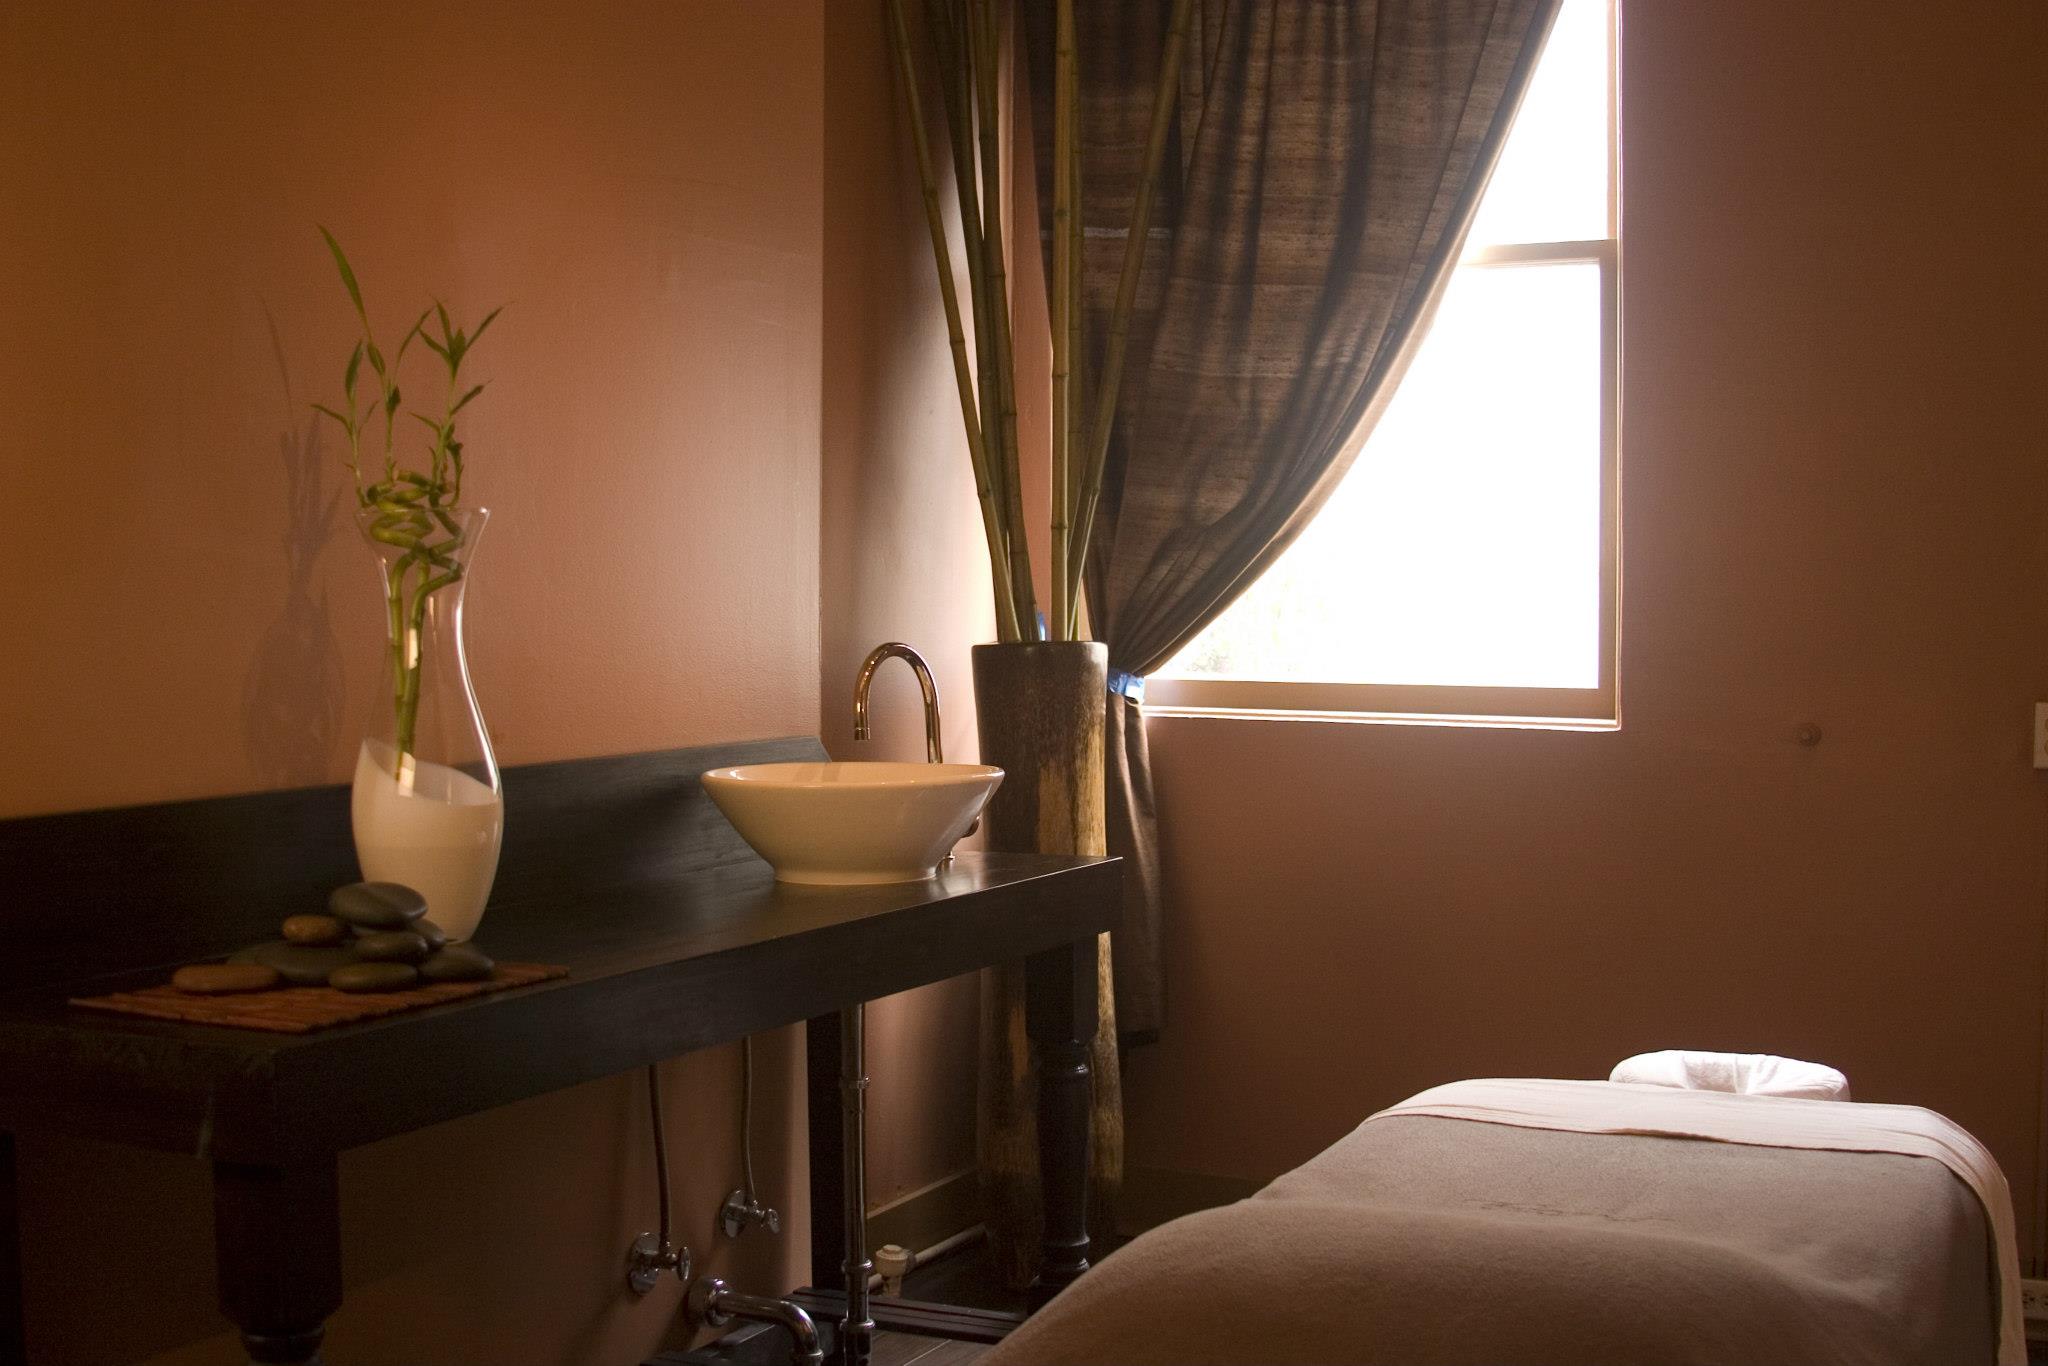 Therapeia Massage offers massage, acupuncture, skin care, endermologie